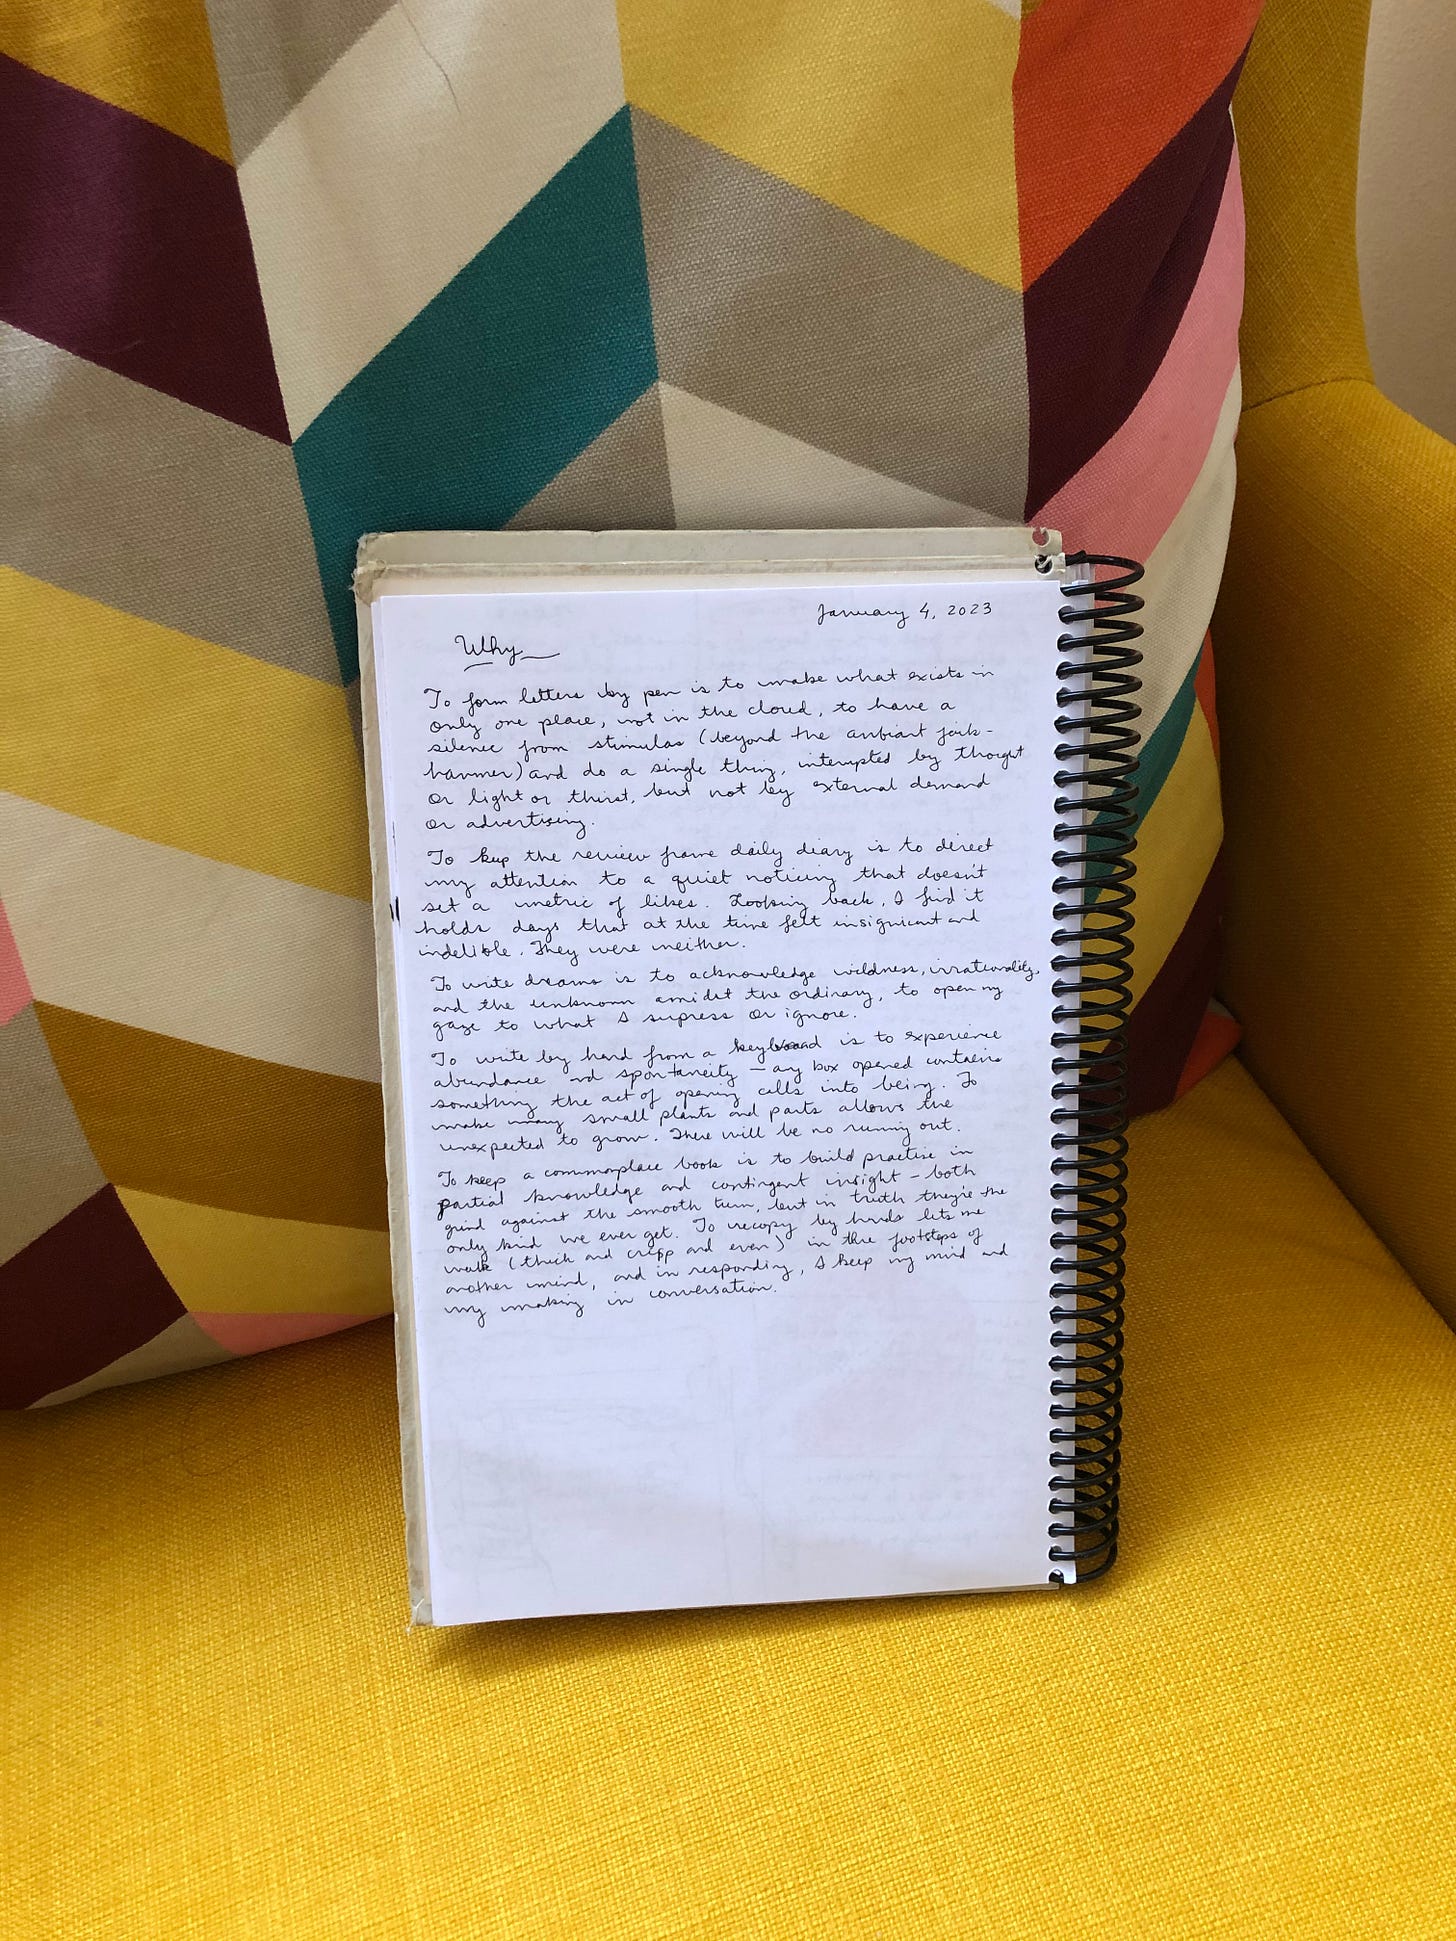 picture of a notebook sitting on a yellow chair